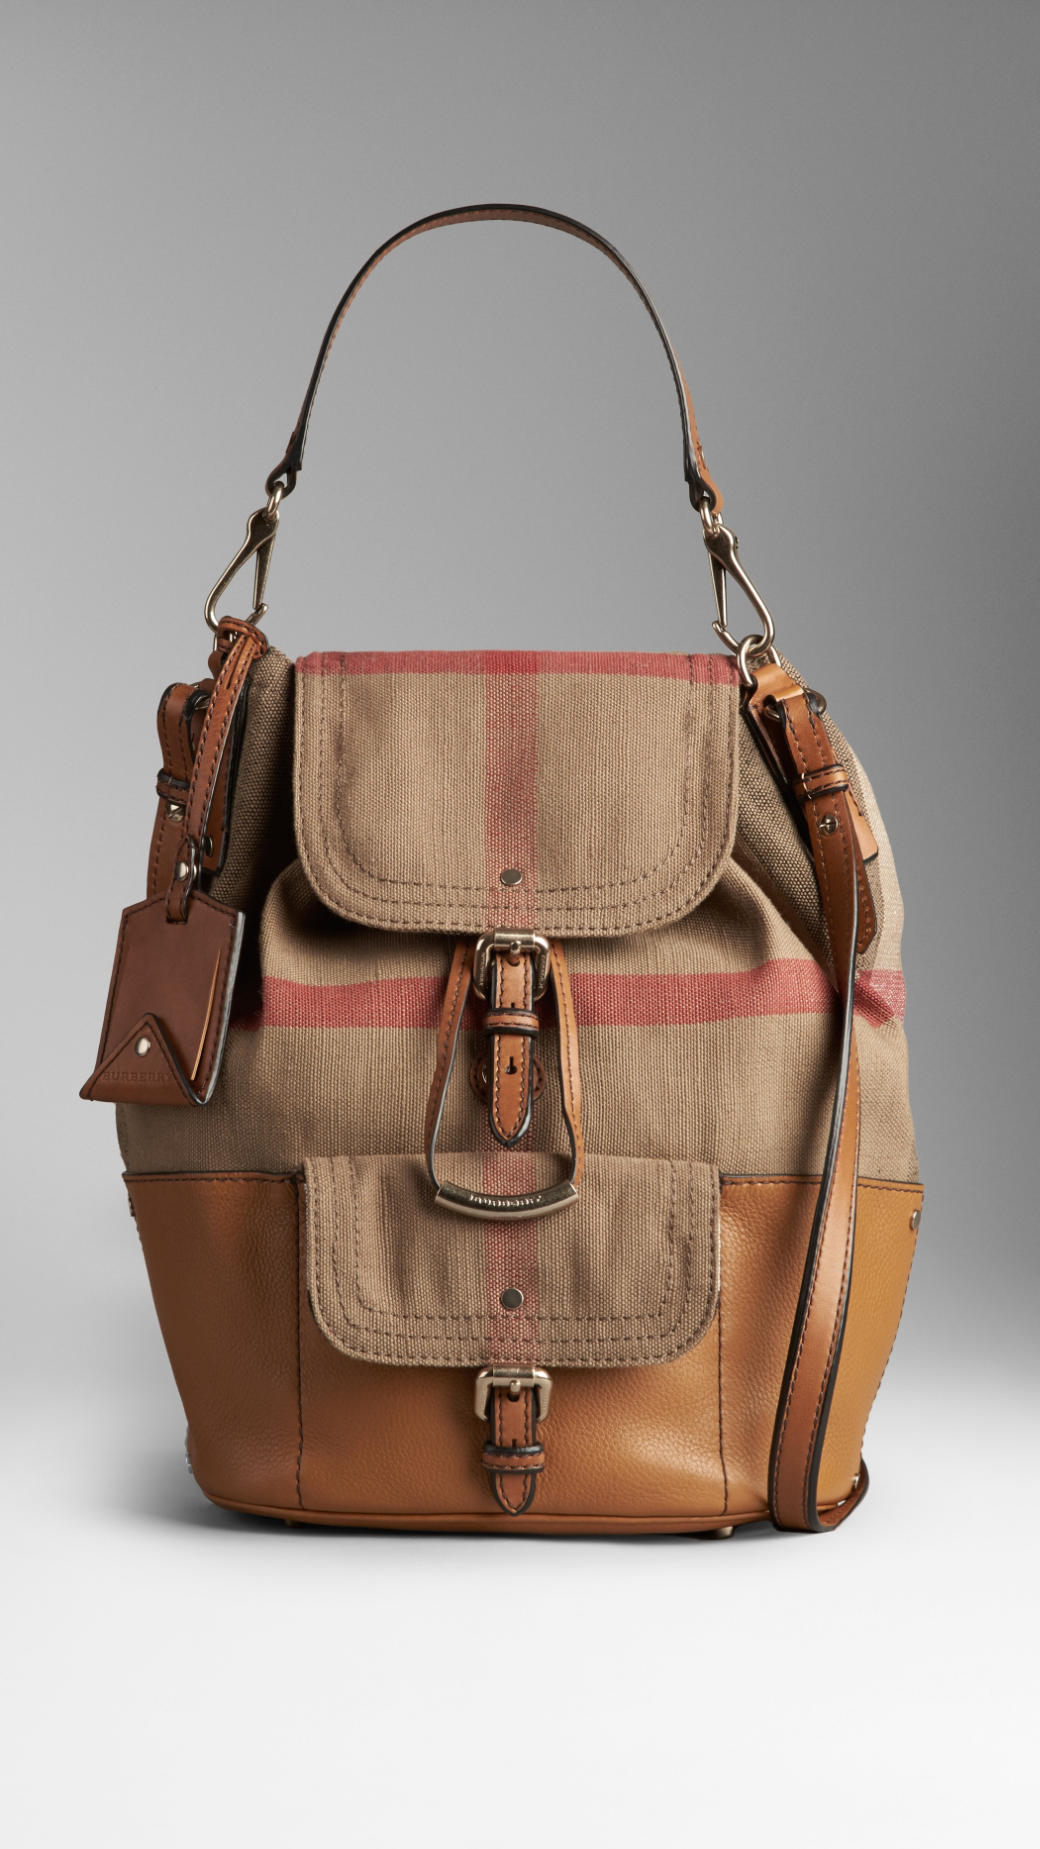 Burberry Canvas Check Hobo Bag in Brown - Lyst